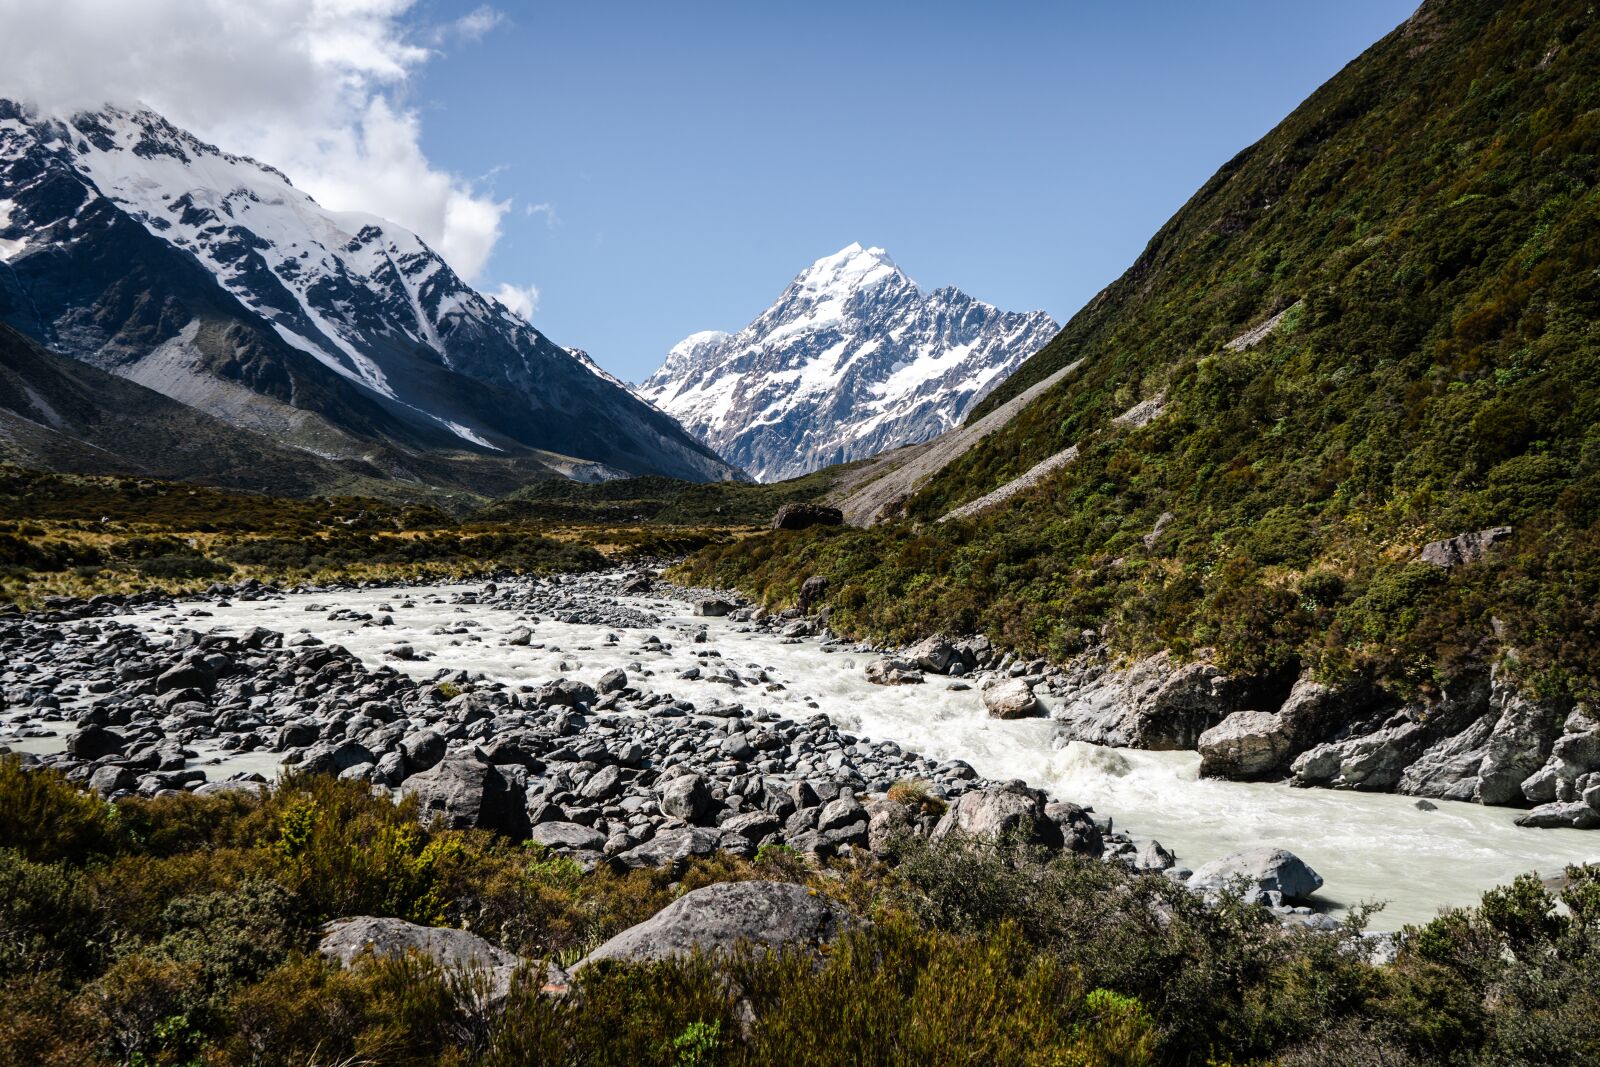 Sony a7 III sample photo. Mt cook, mountain, nature photography